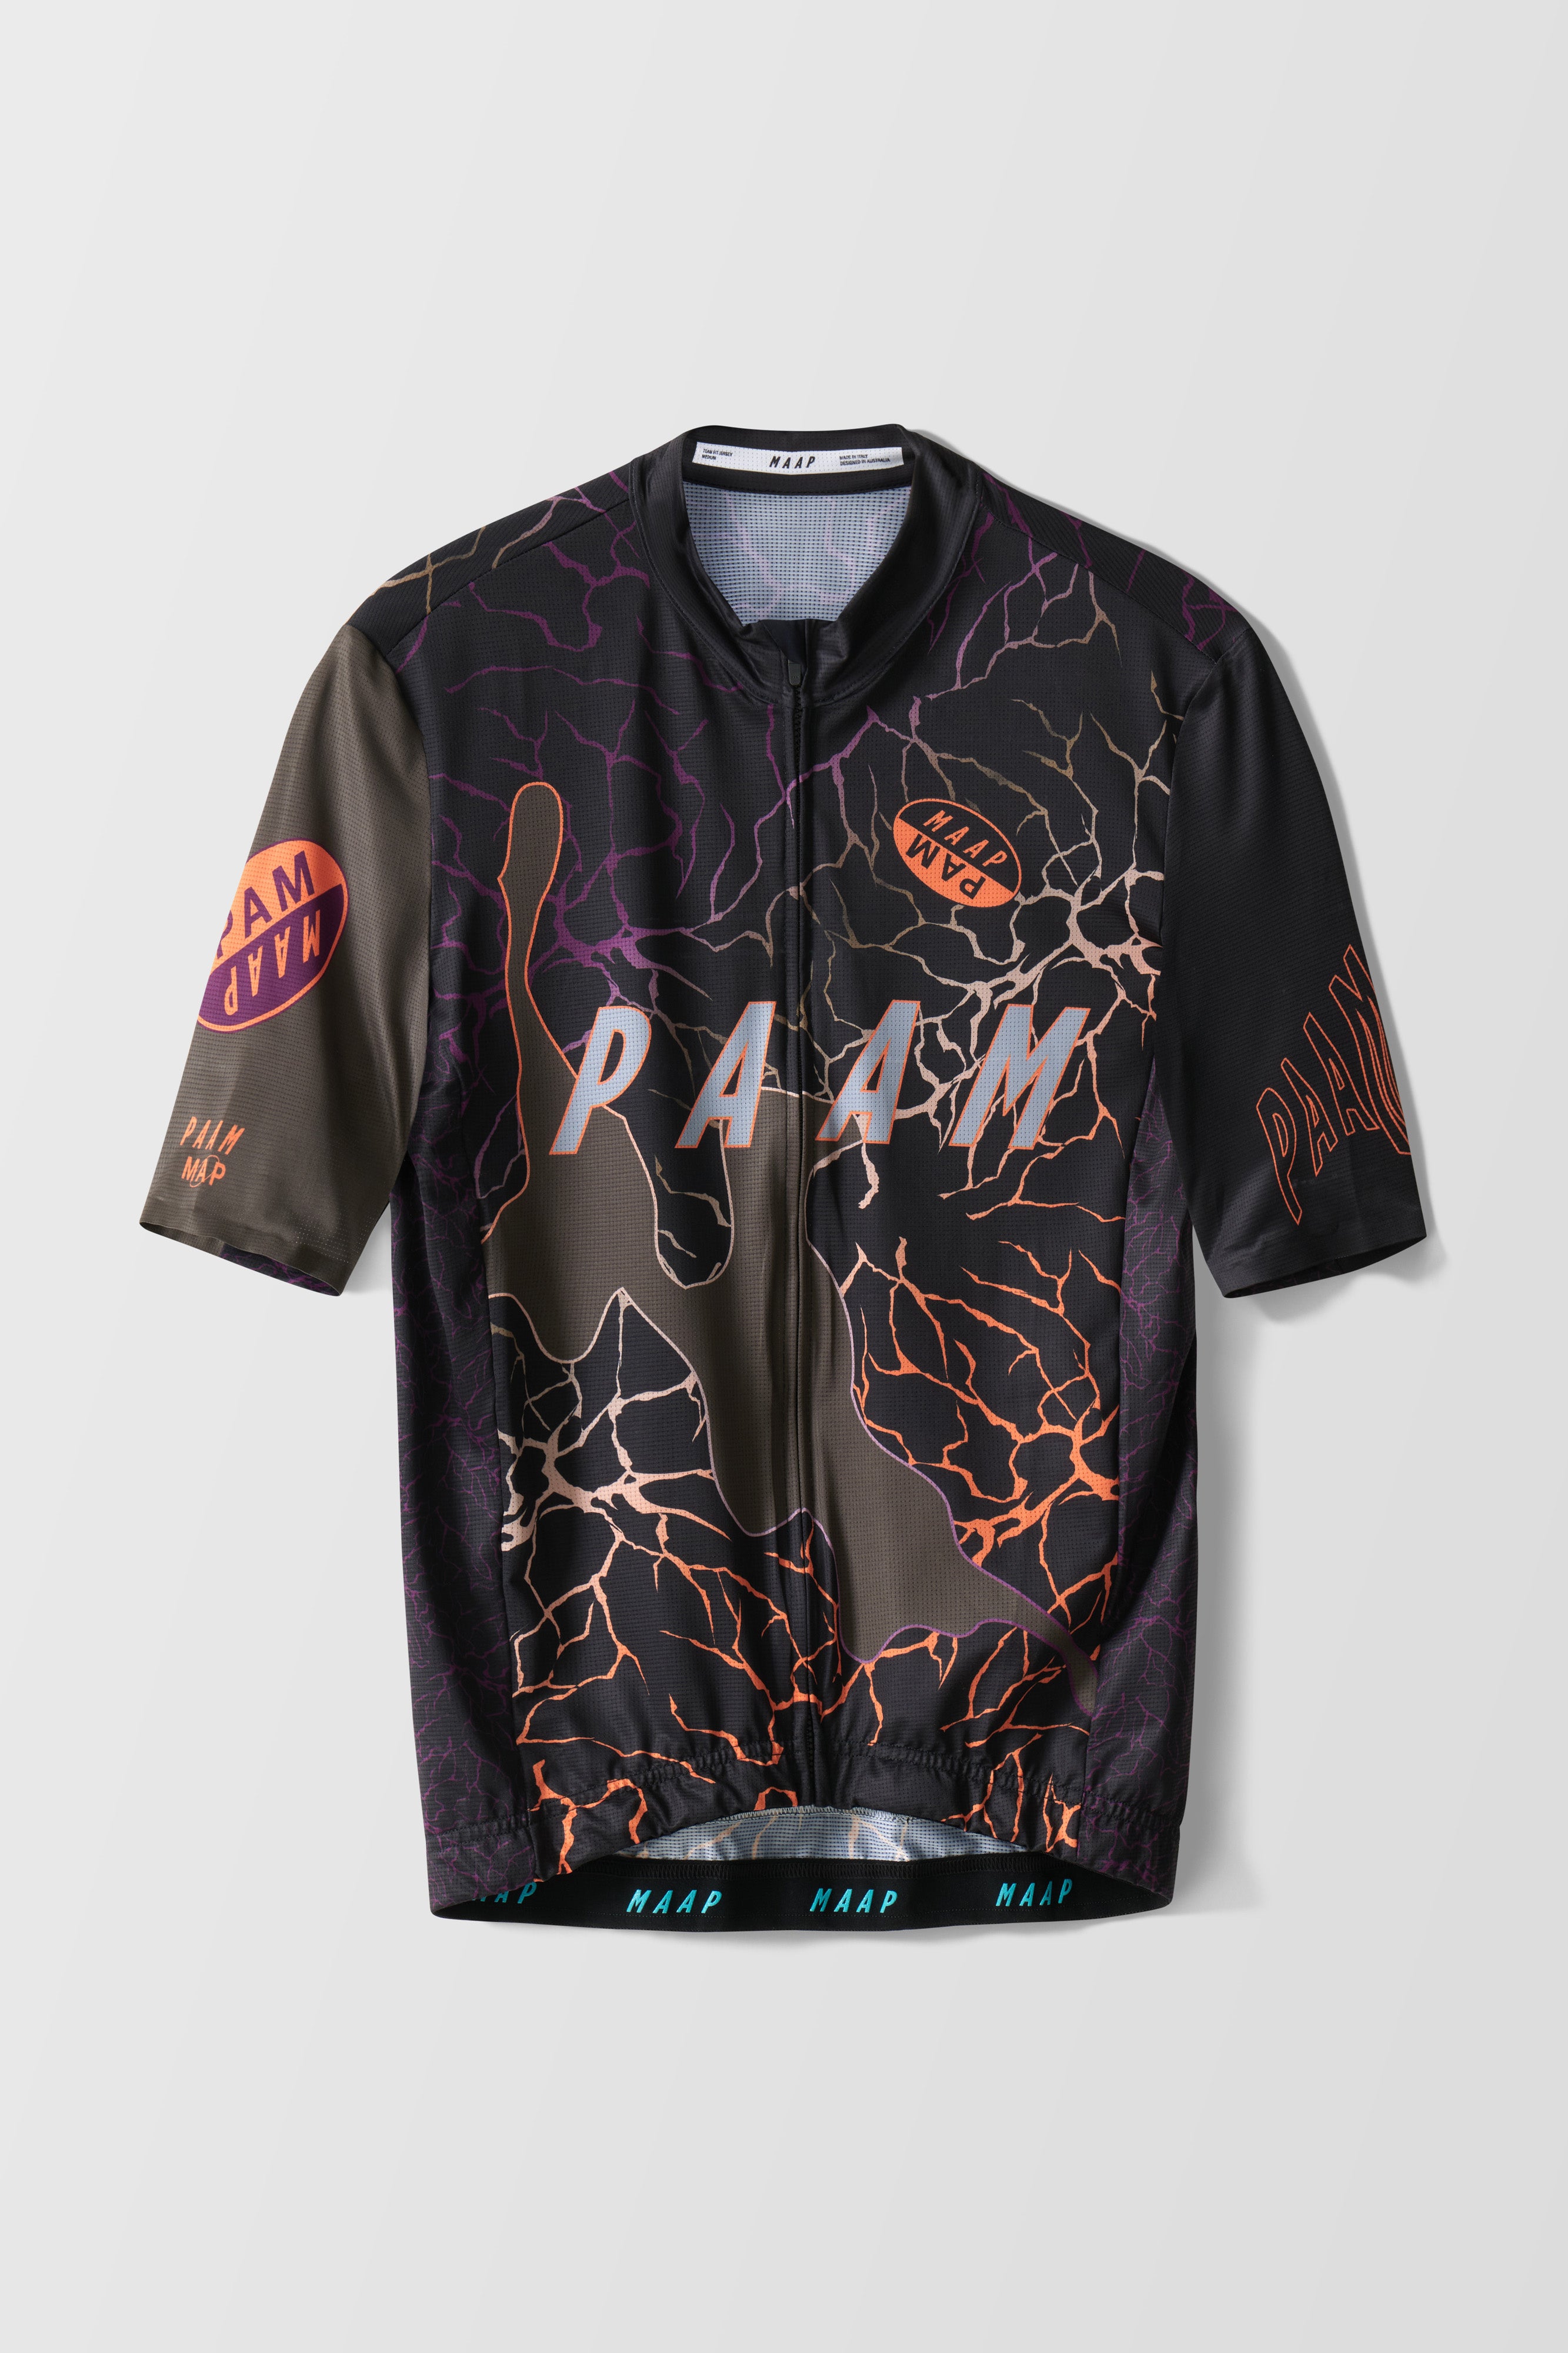 PAAM 2.0 WILD TEAM JERSEY – P.A.M. (Perks And Mini)